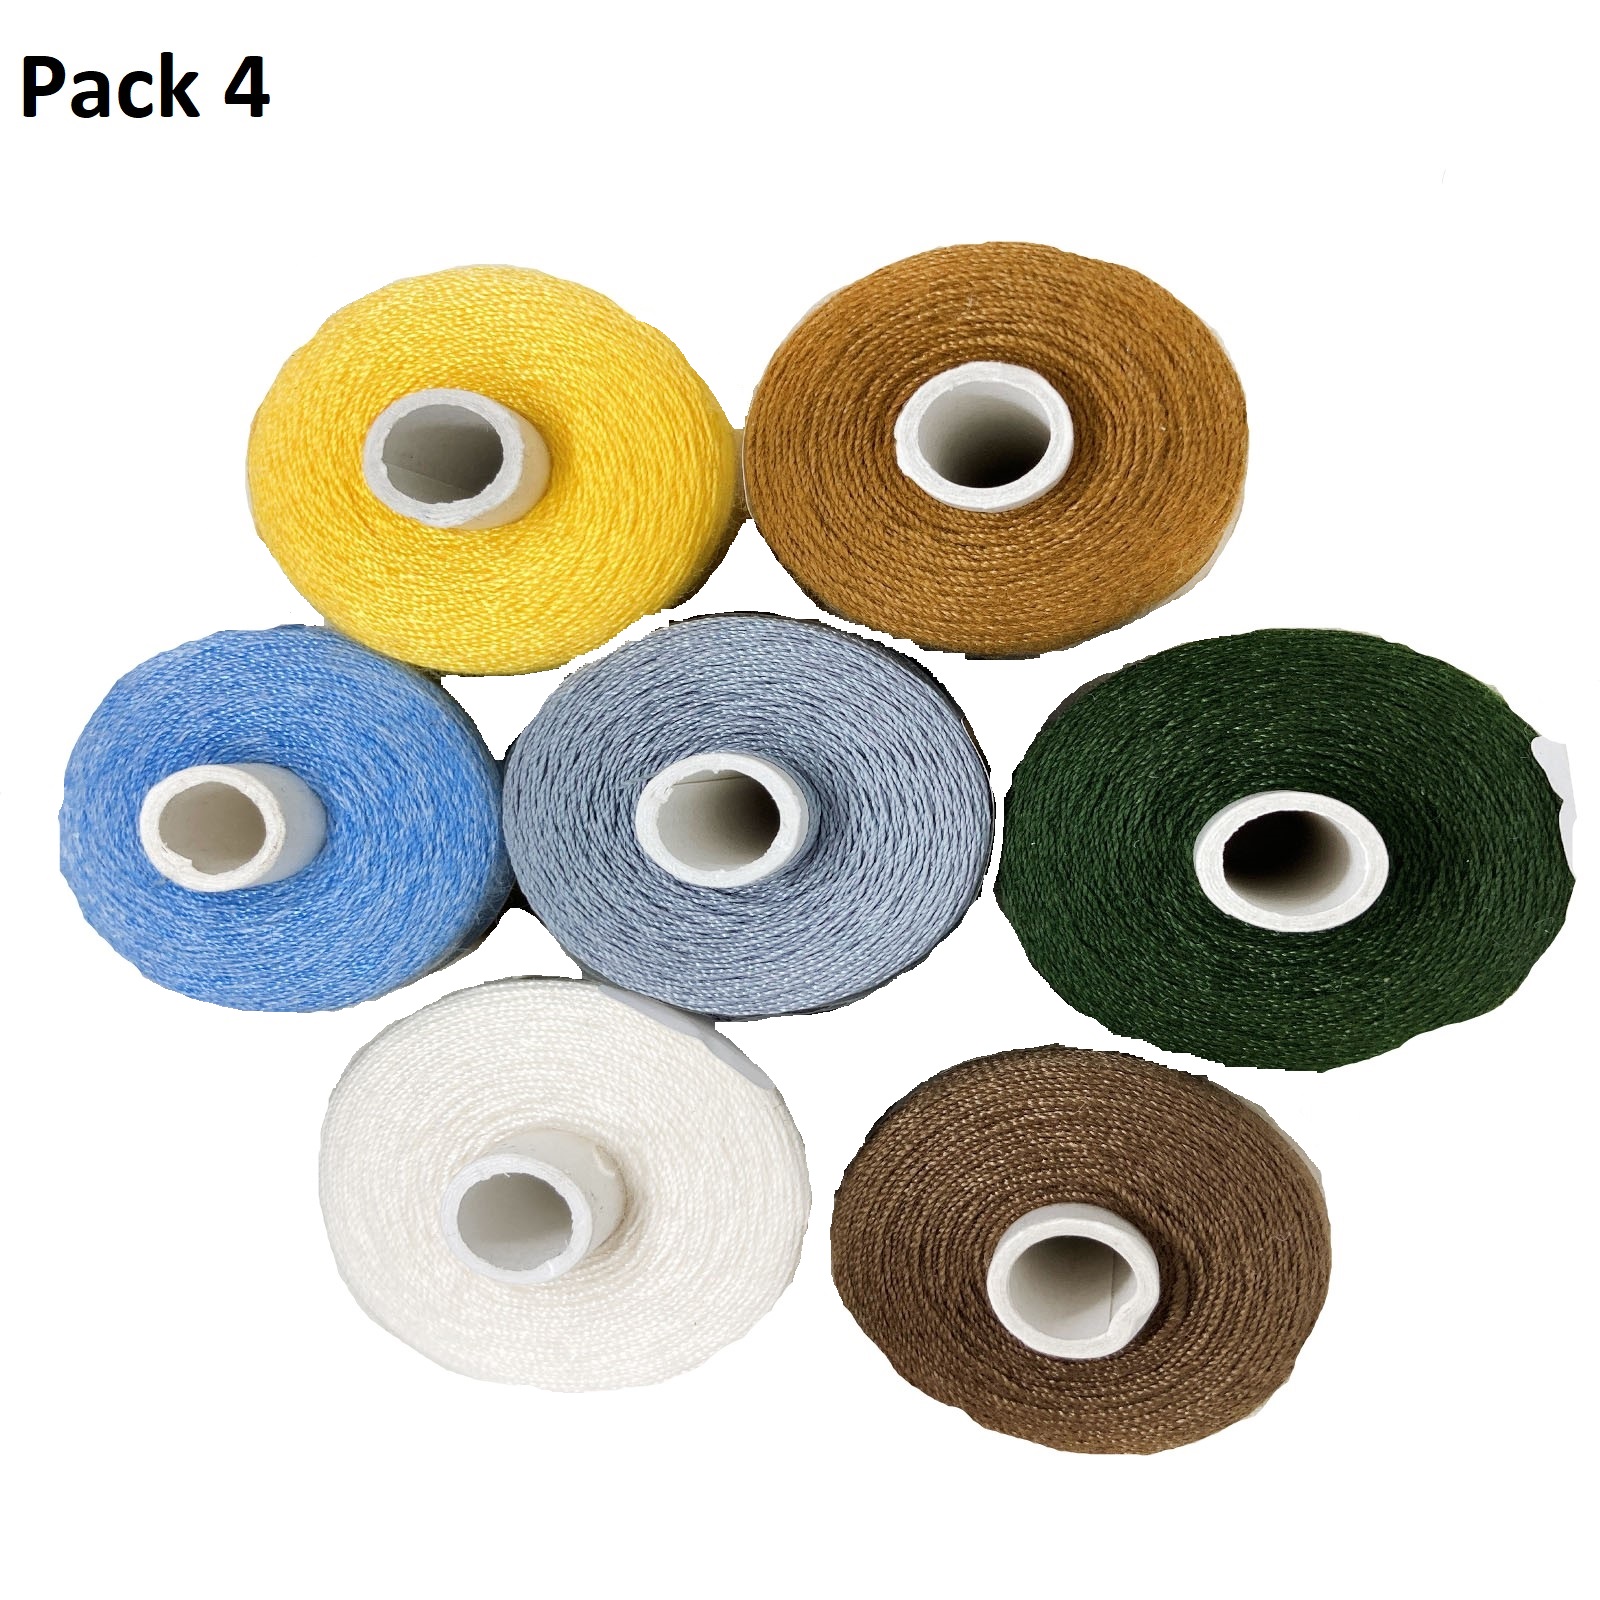 Upholstery Sewing Machine Thread Packs